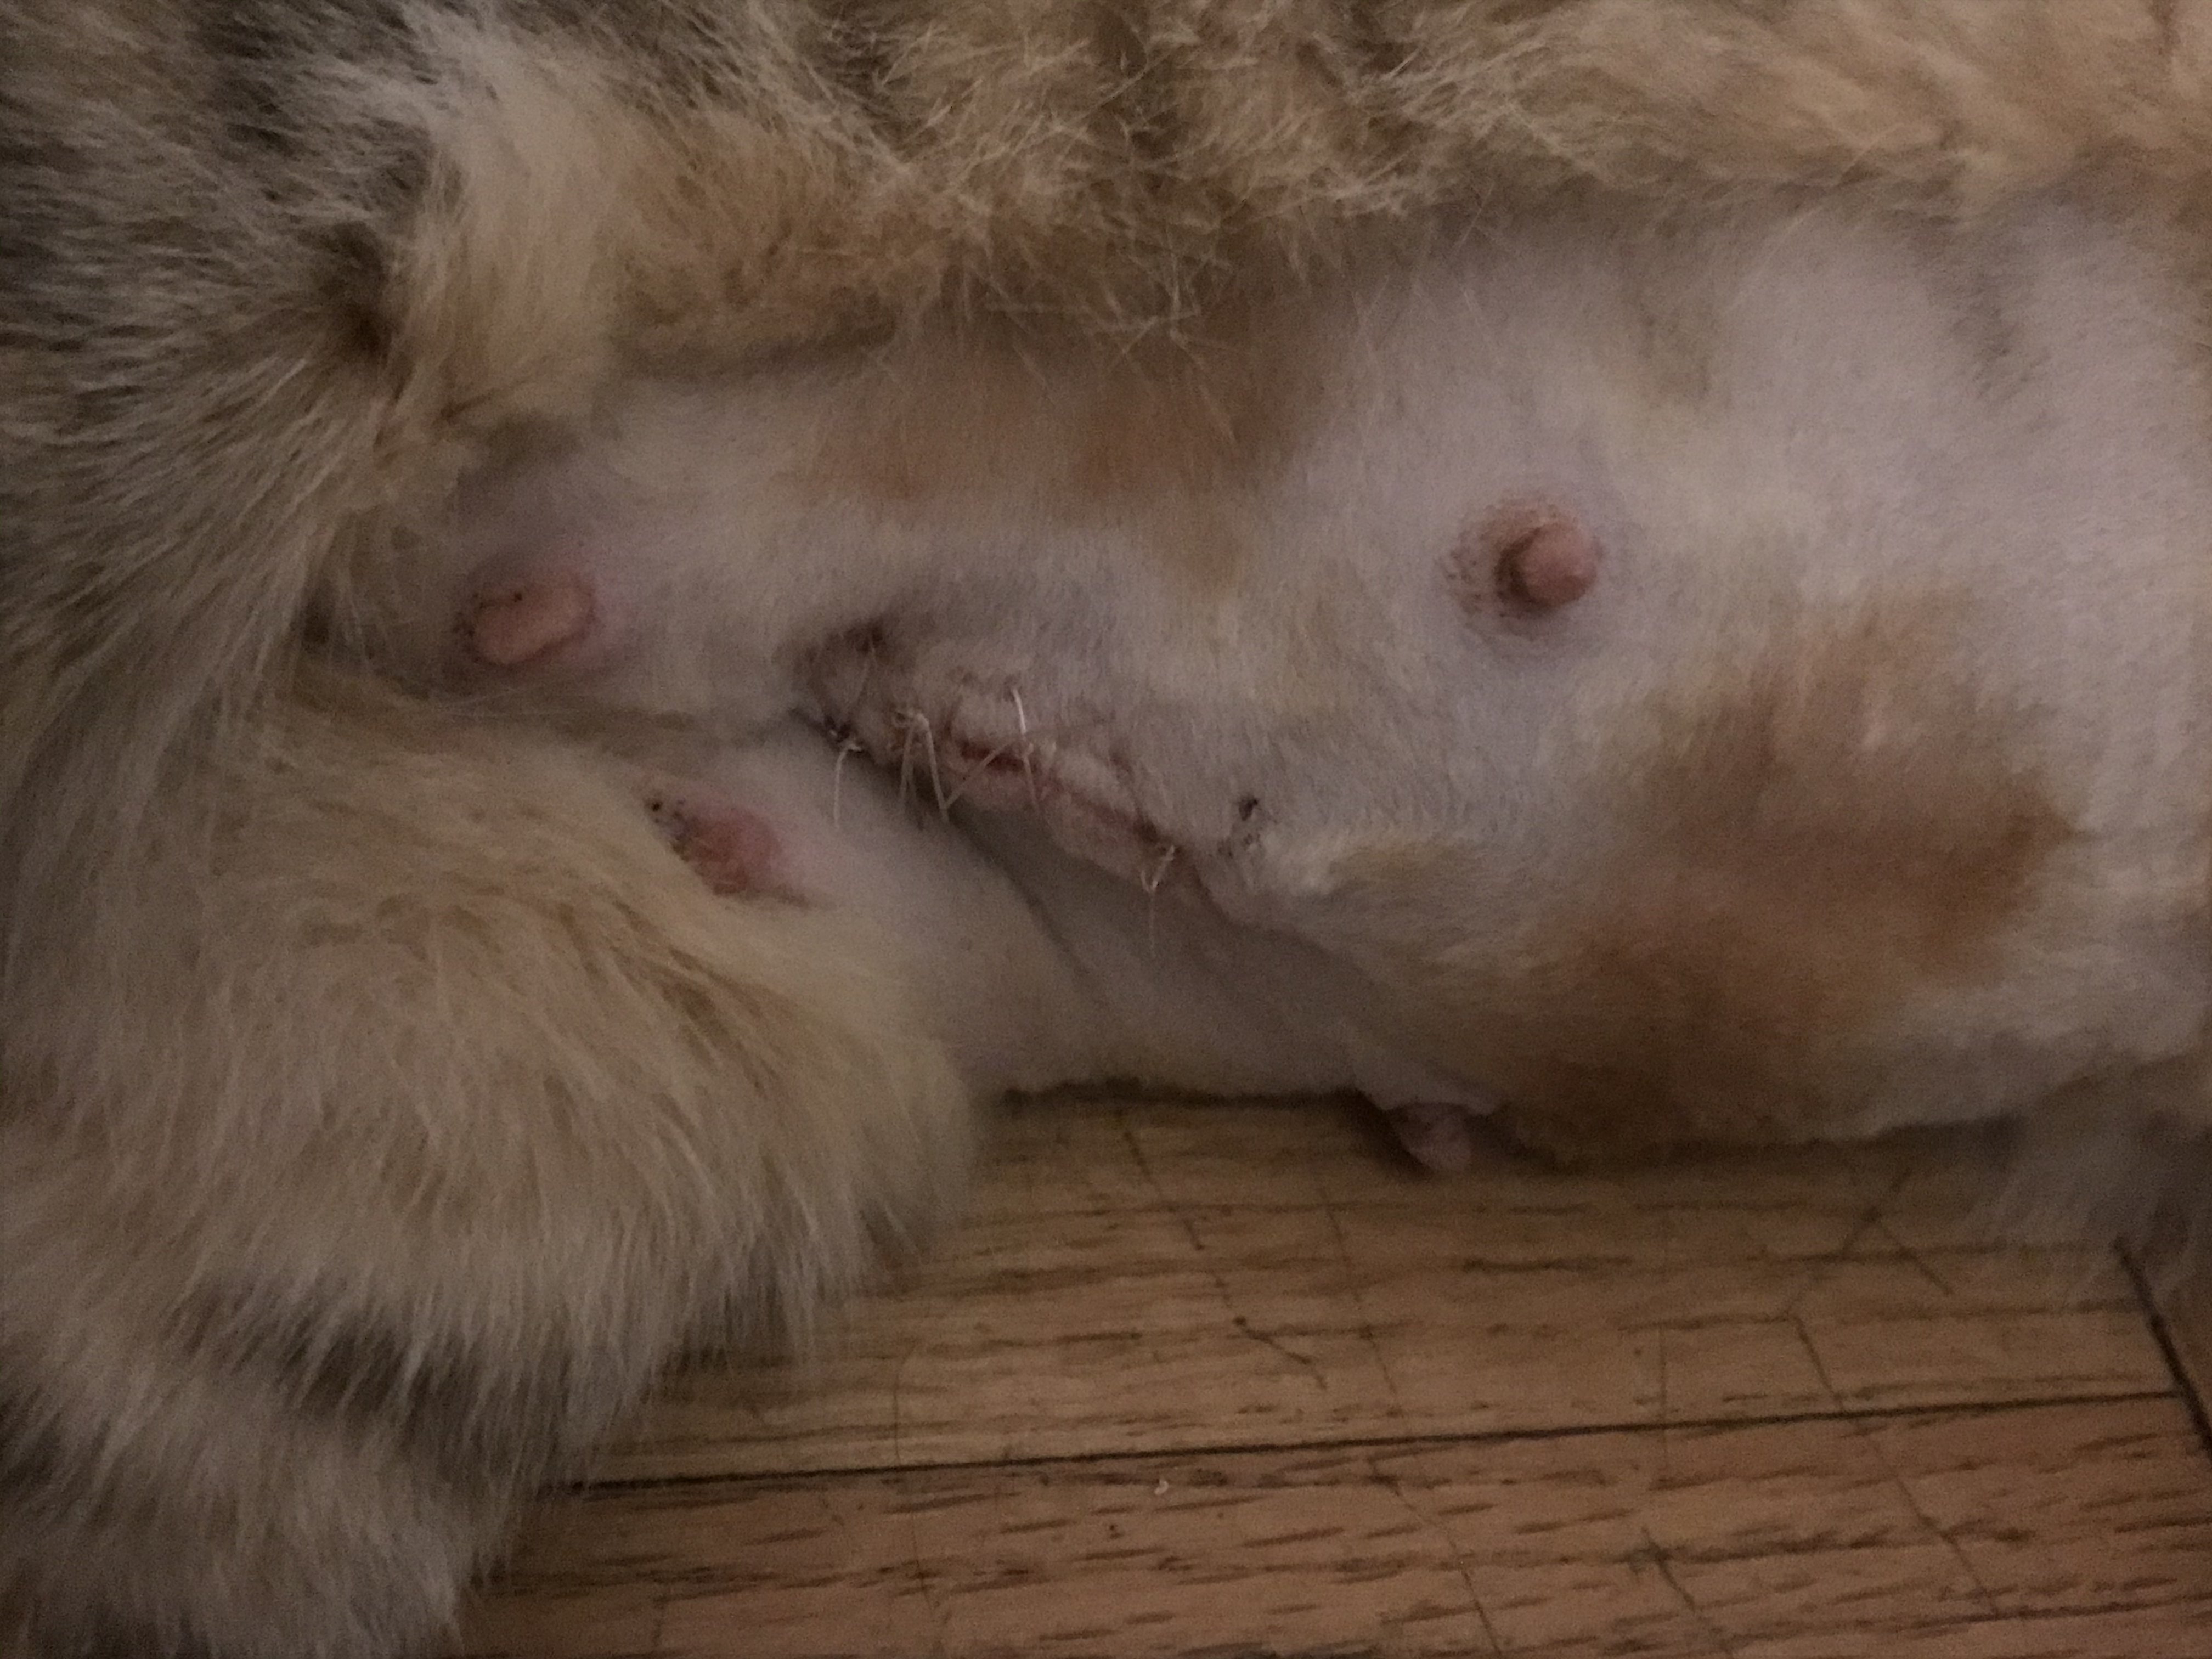 Does my cat spay incision looks normal？ TheCatSite